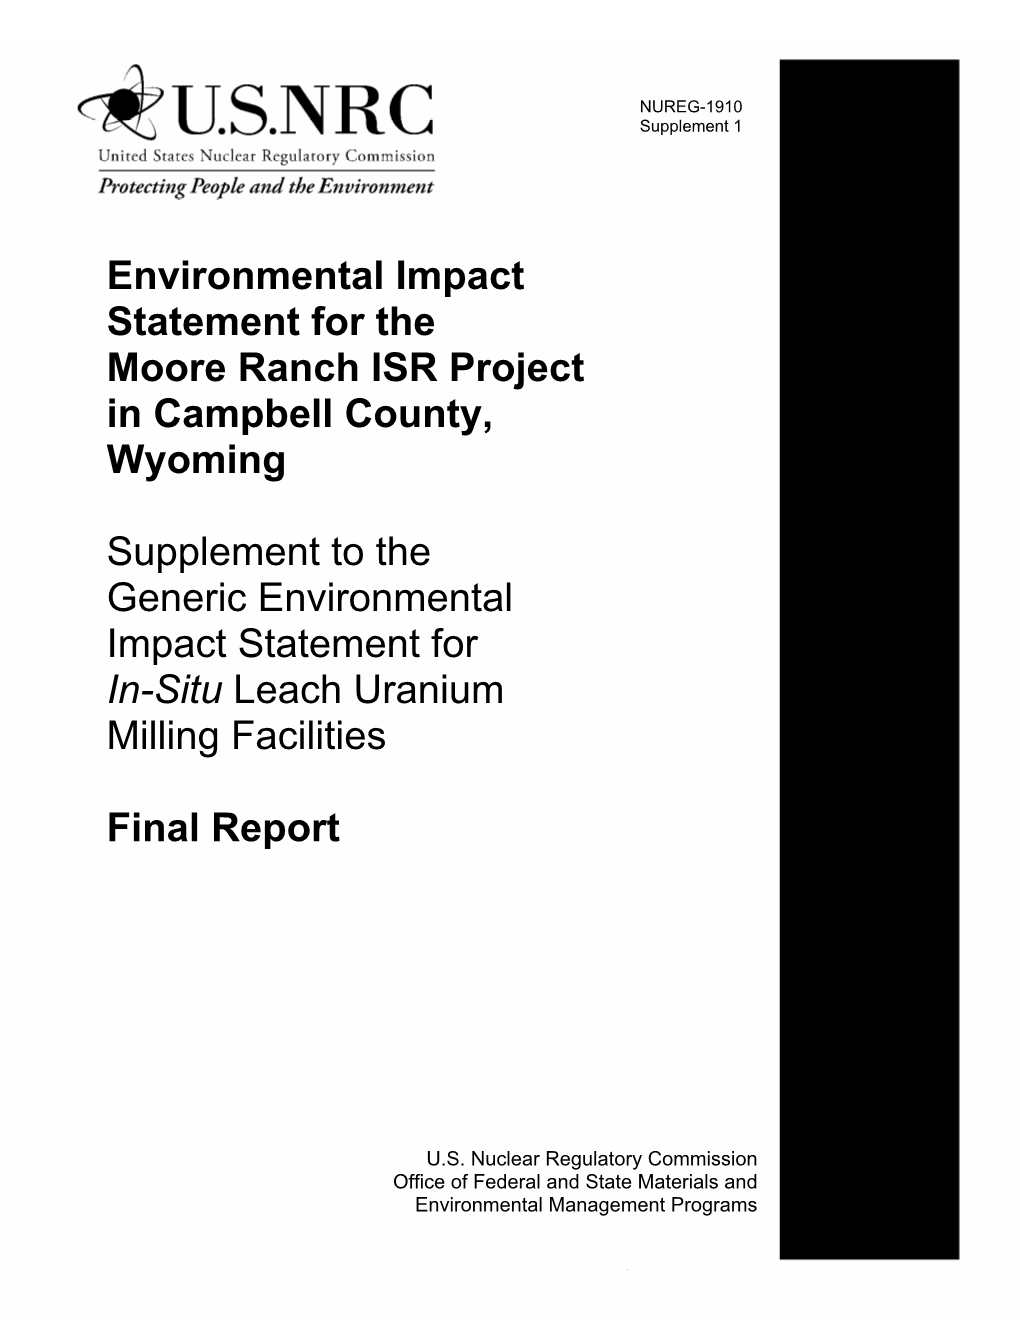 Environmental Impact Statement for the Moore Ranch ISR Project in Campbell County, Wyoming